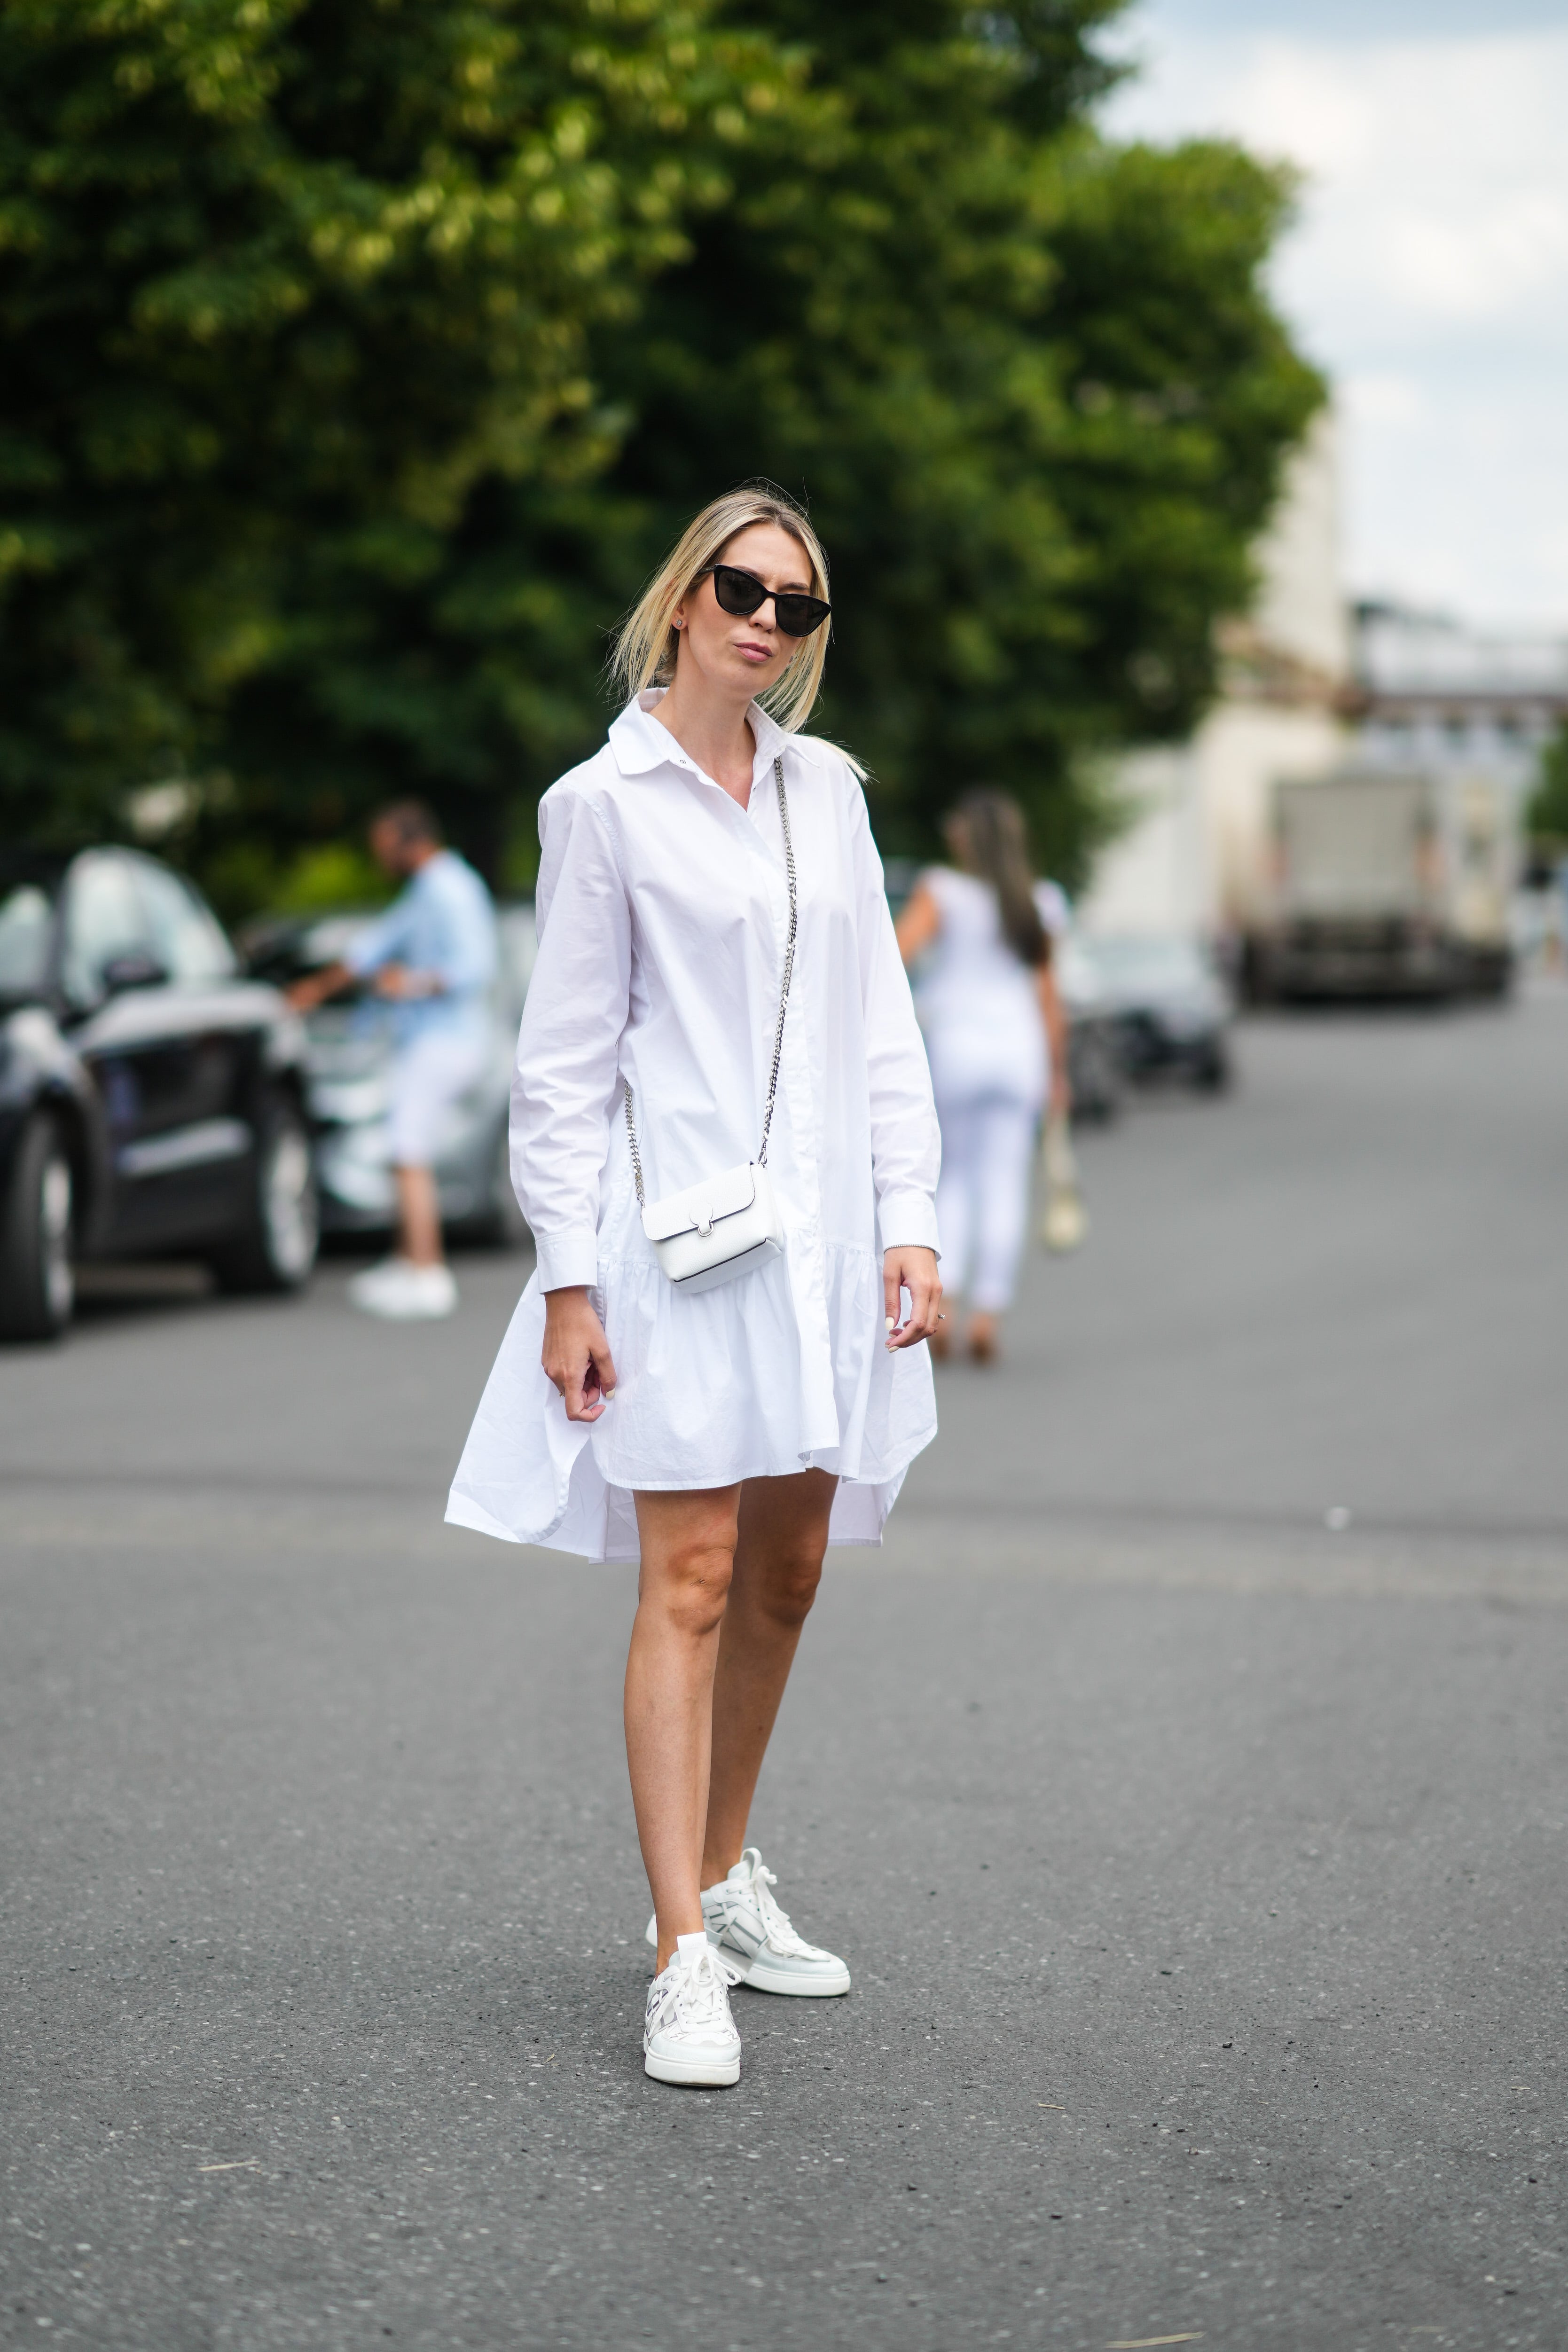 HOW TO STYLE DESIGNER SNEAKERS